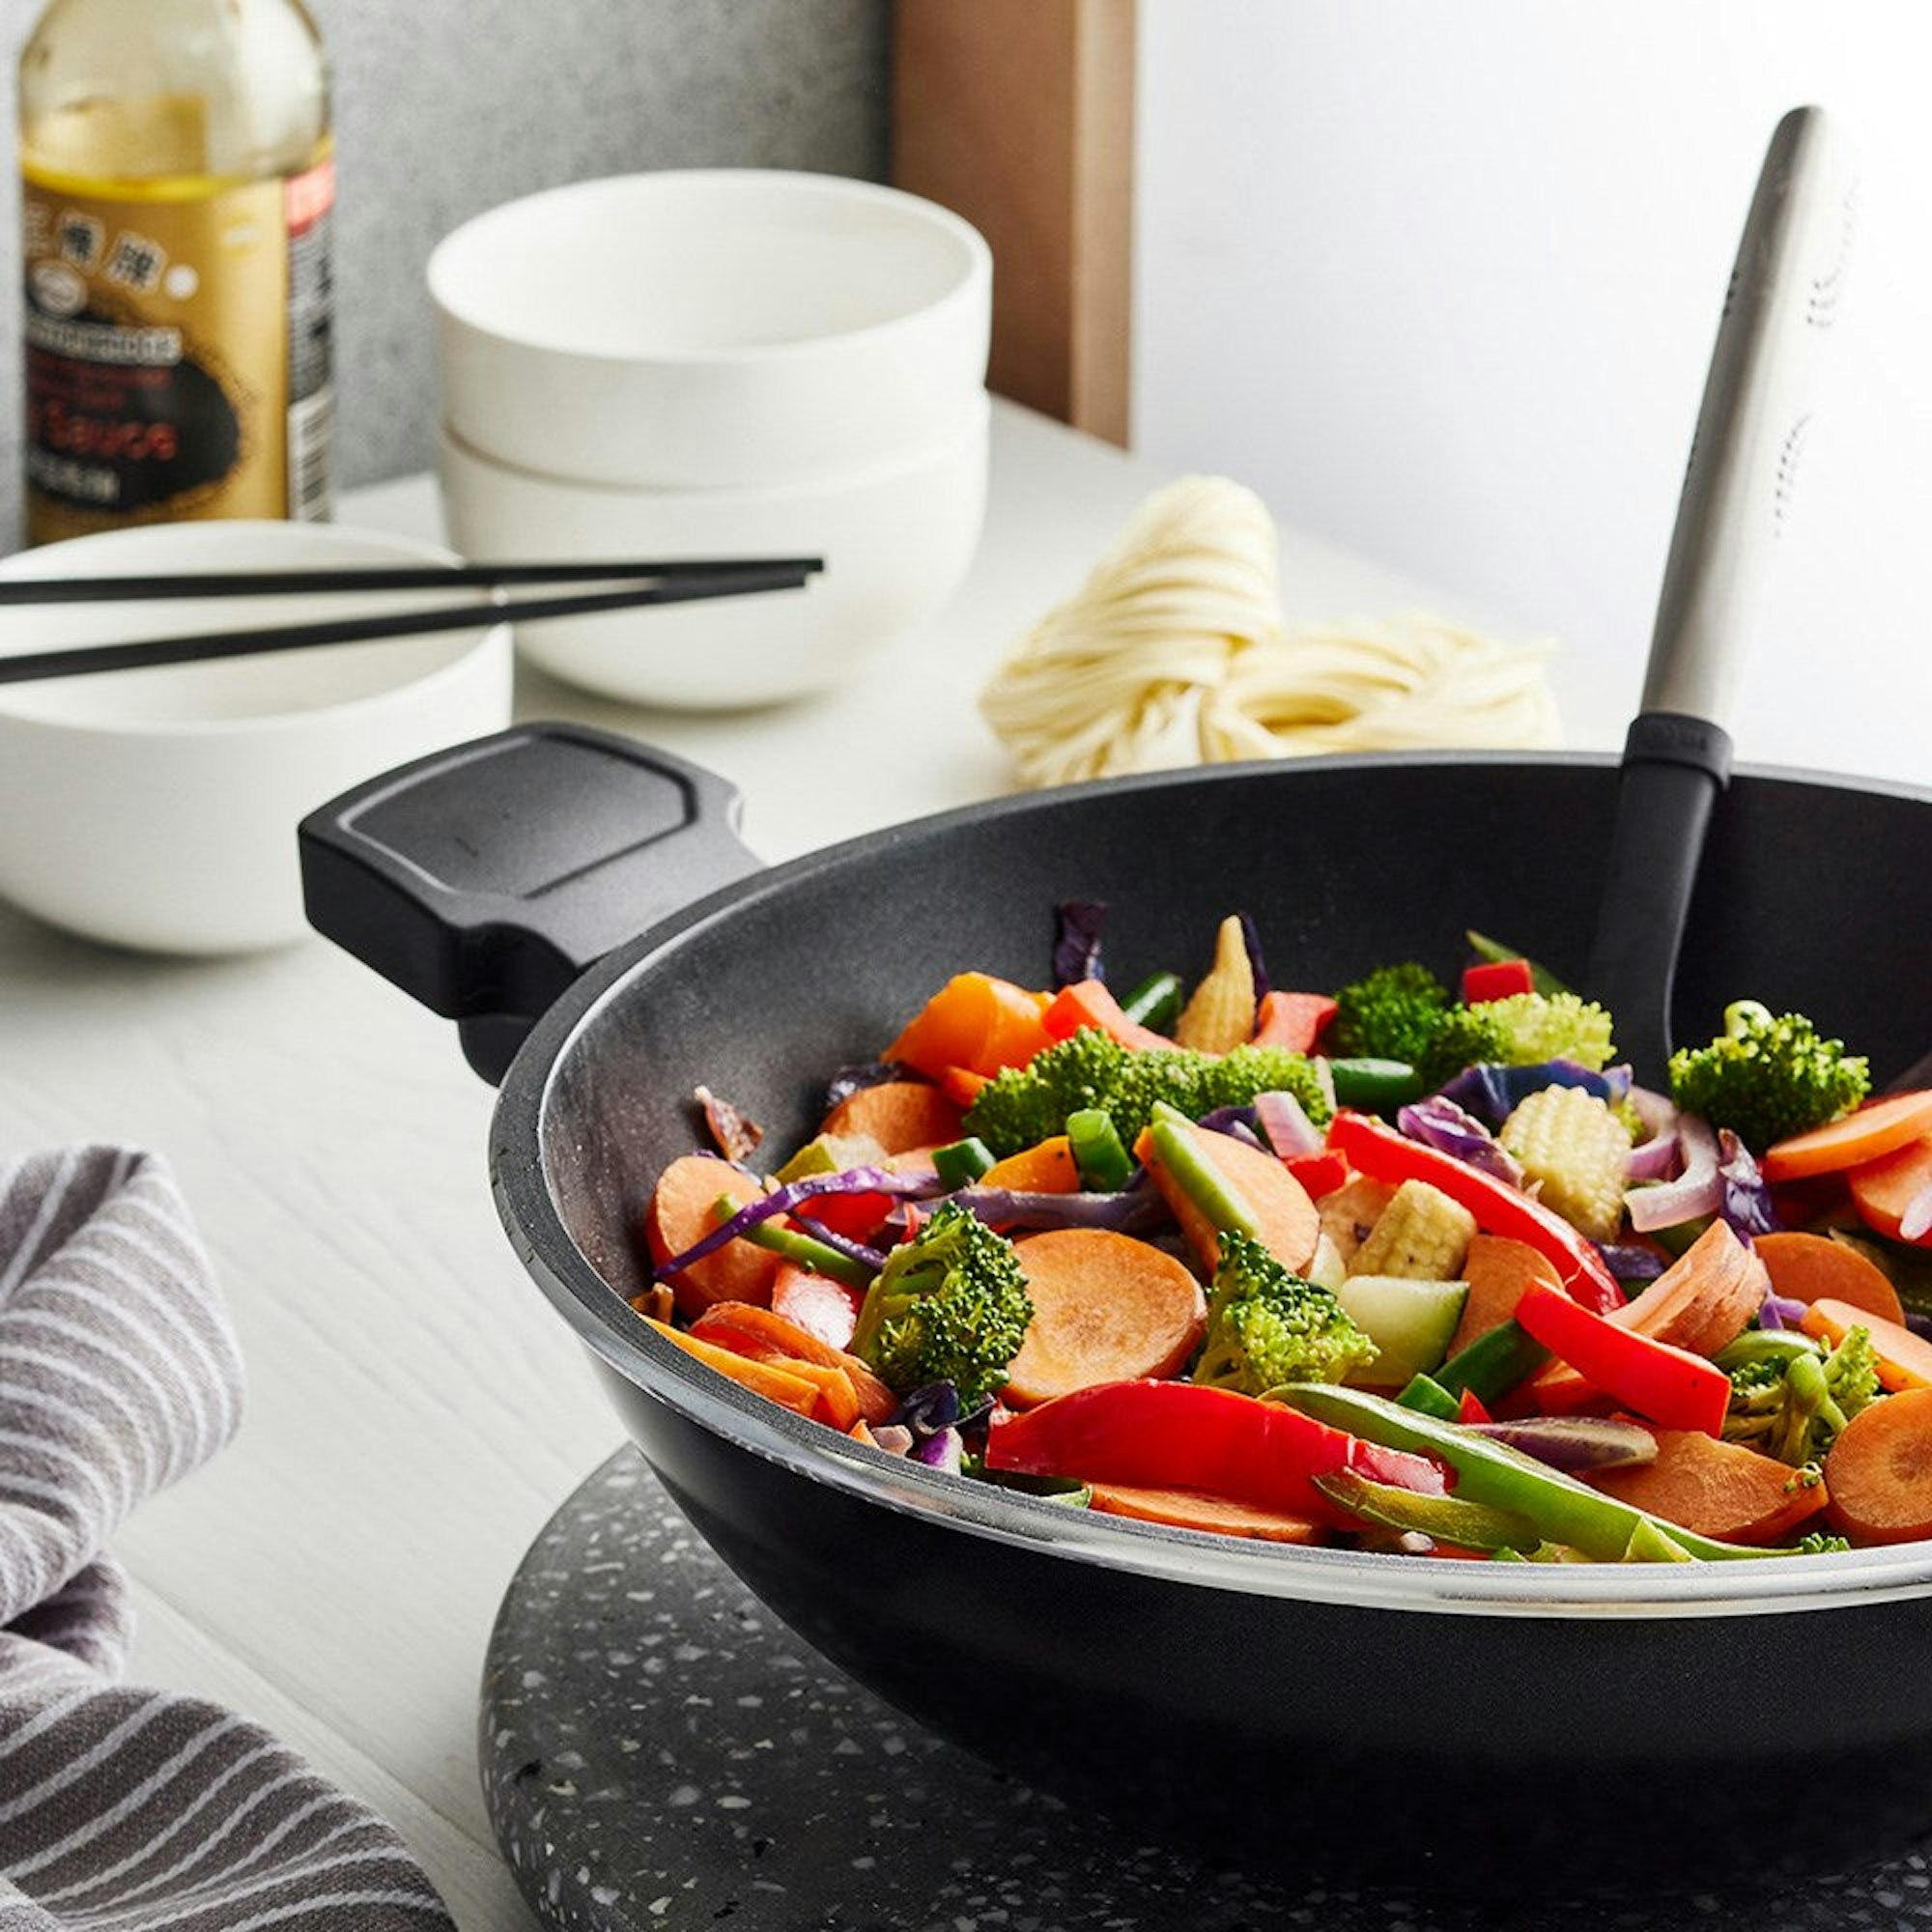 How to Master Stir-frying? Robins Kitchen Blog - In The Kitchen. Vegetable stir fry in non stick wok by the window.